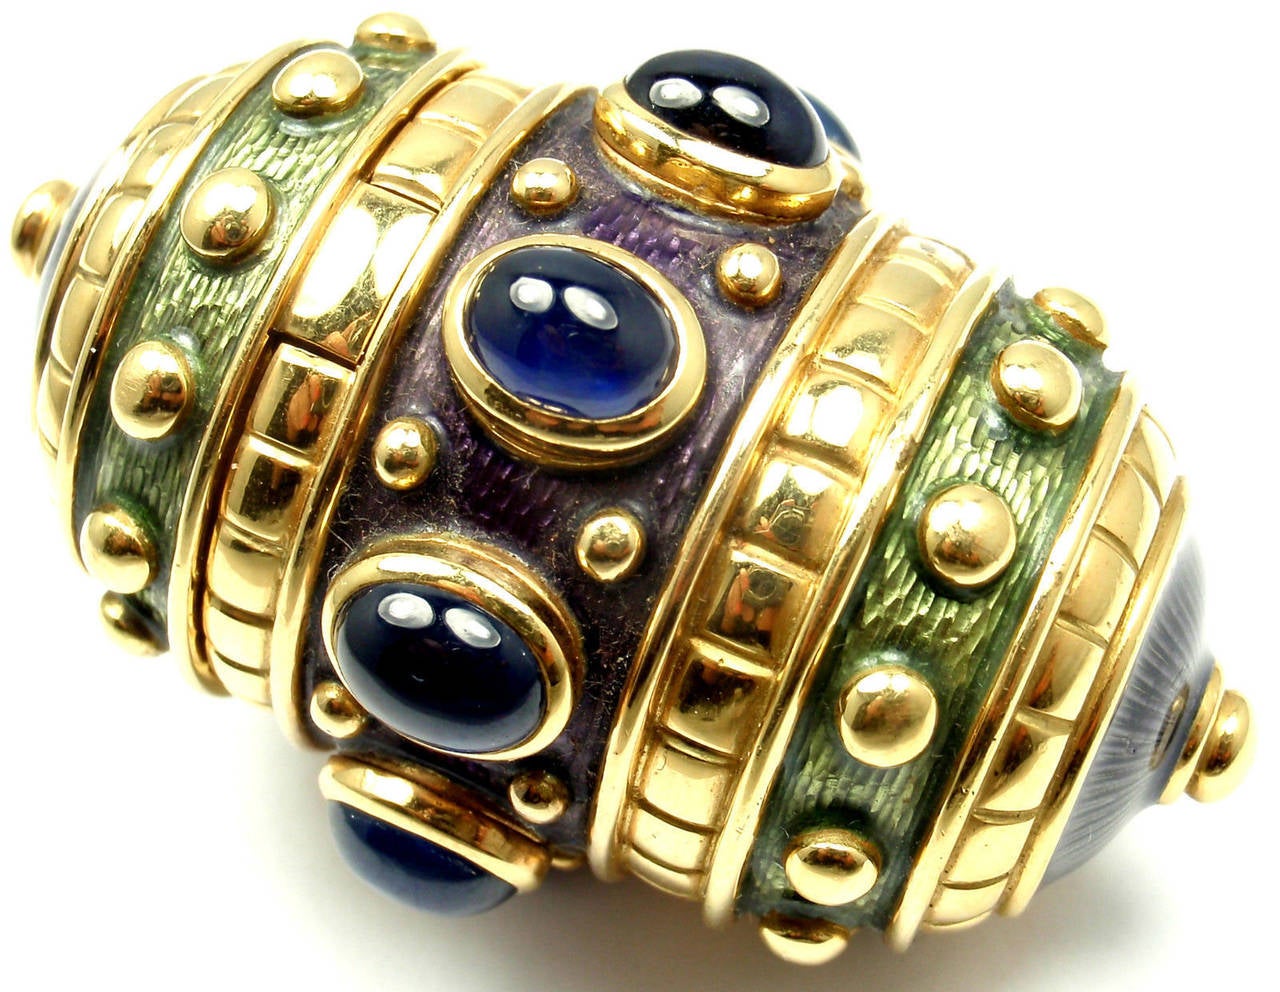 18k Yellow Gold Sapphire And Enamel Large Pill Box by AMR Shaker Geneve. With 8 oval cabochon sapphires 9mm x 7mm each

Details:
Measurements: 2 1/4